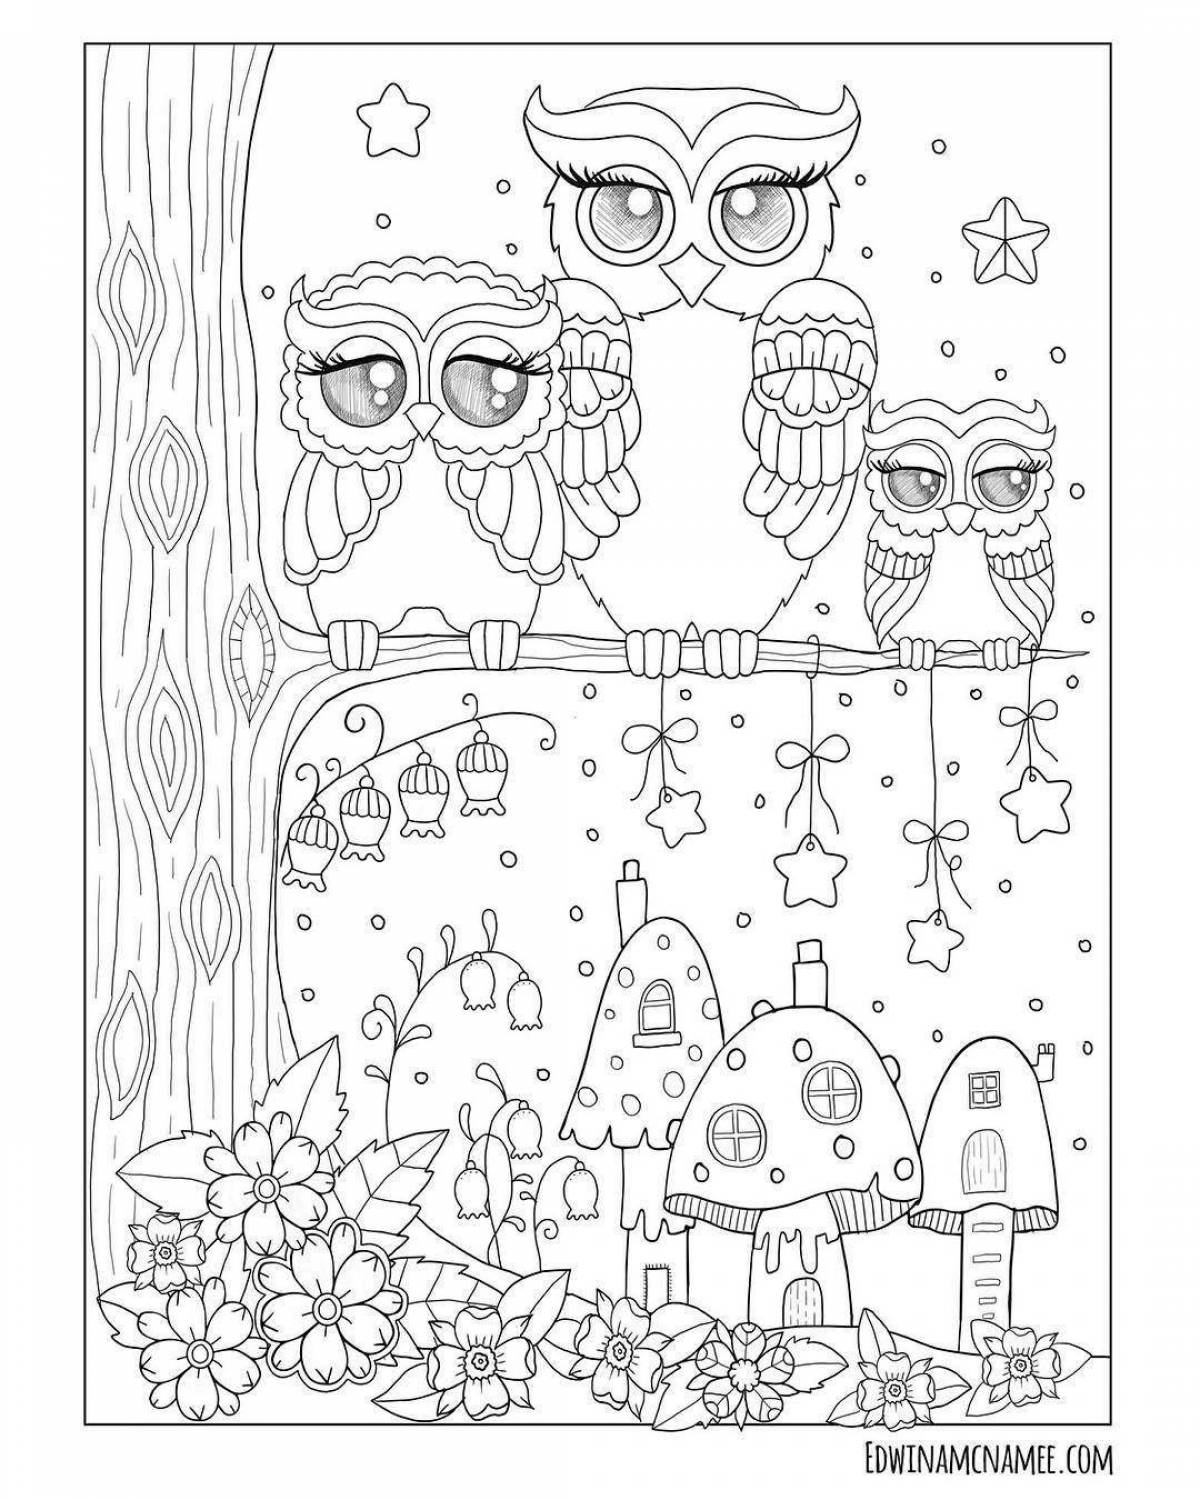 A funny Christmas owl coloring book